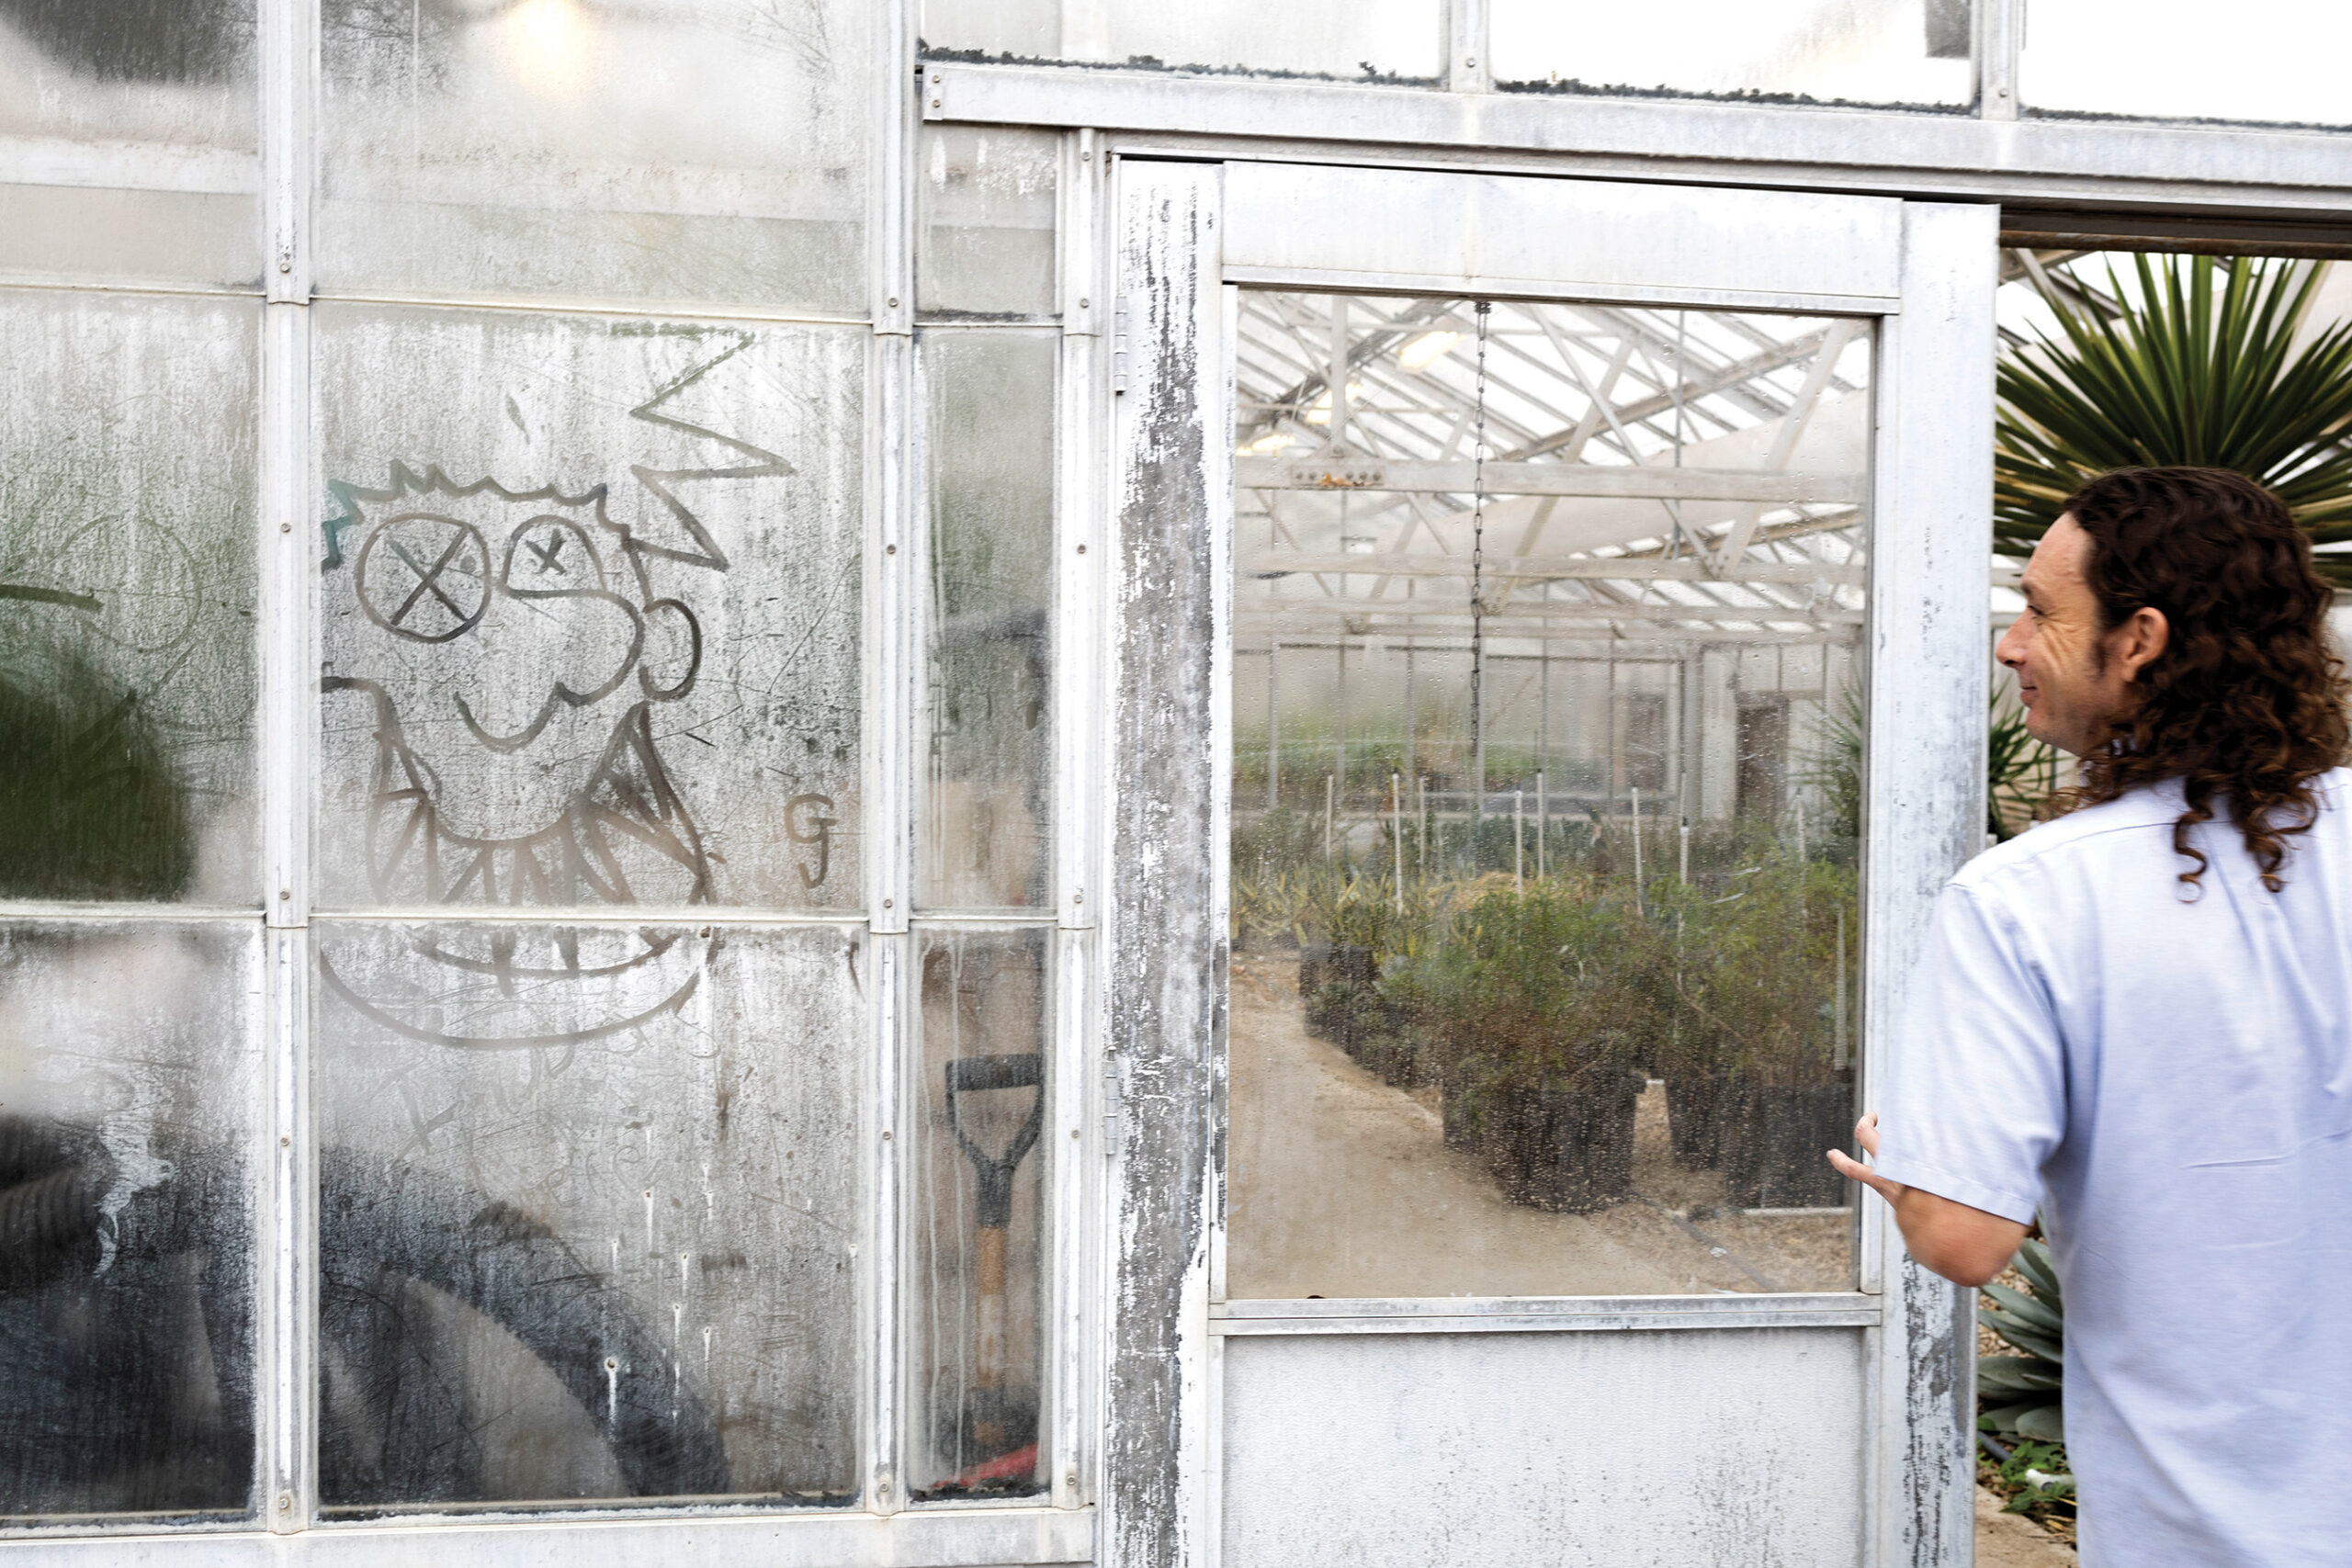 Kasey smiles at a drawing made into the fog on the glass of a greenhouse